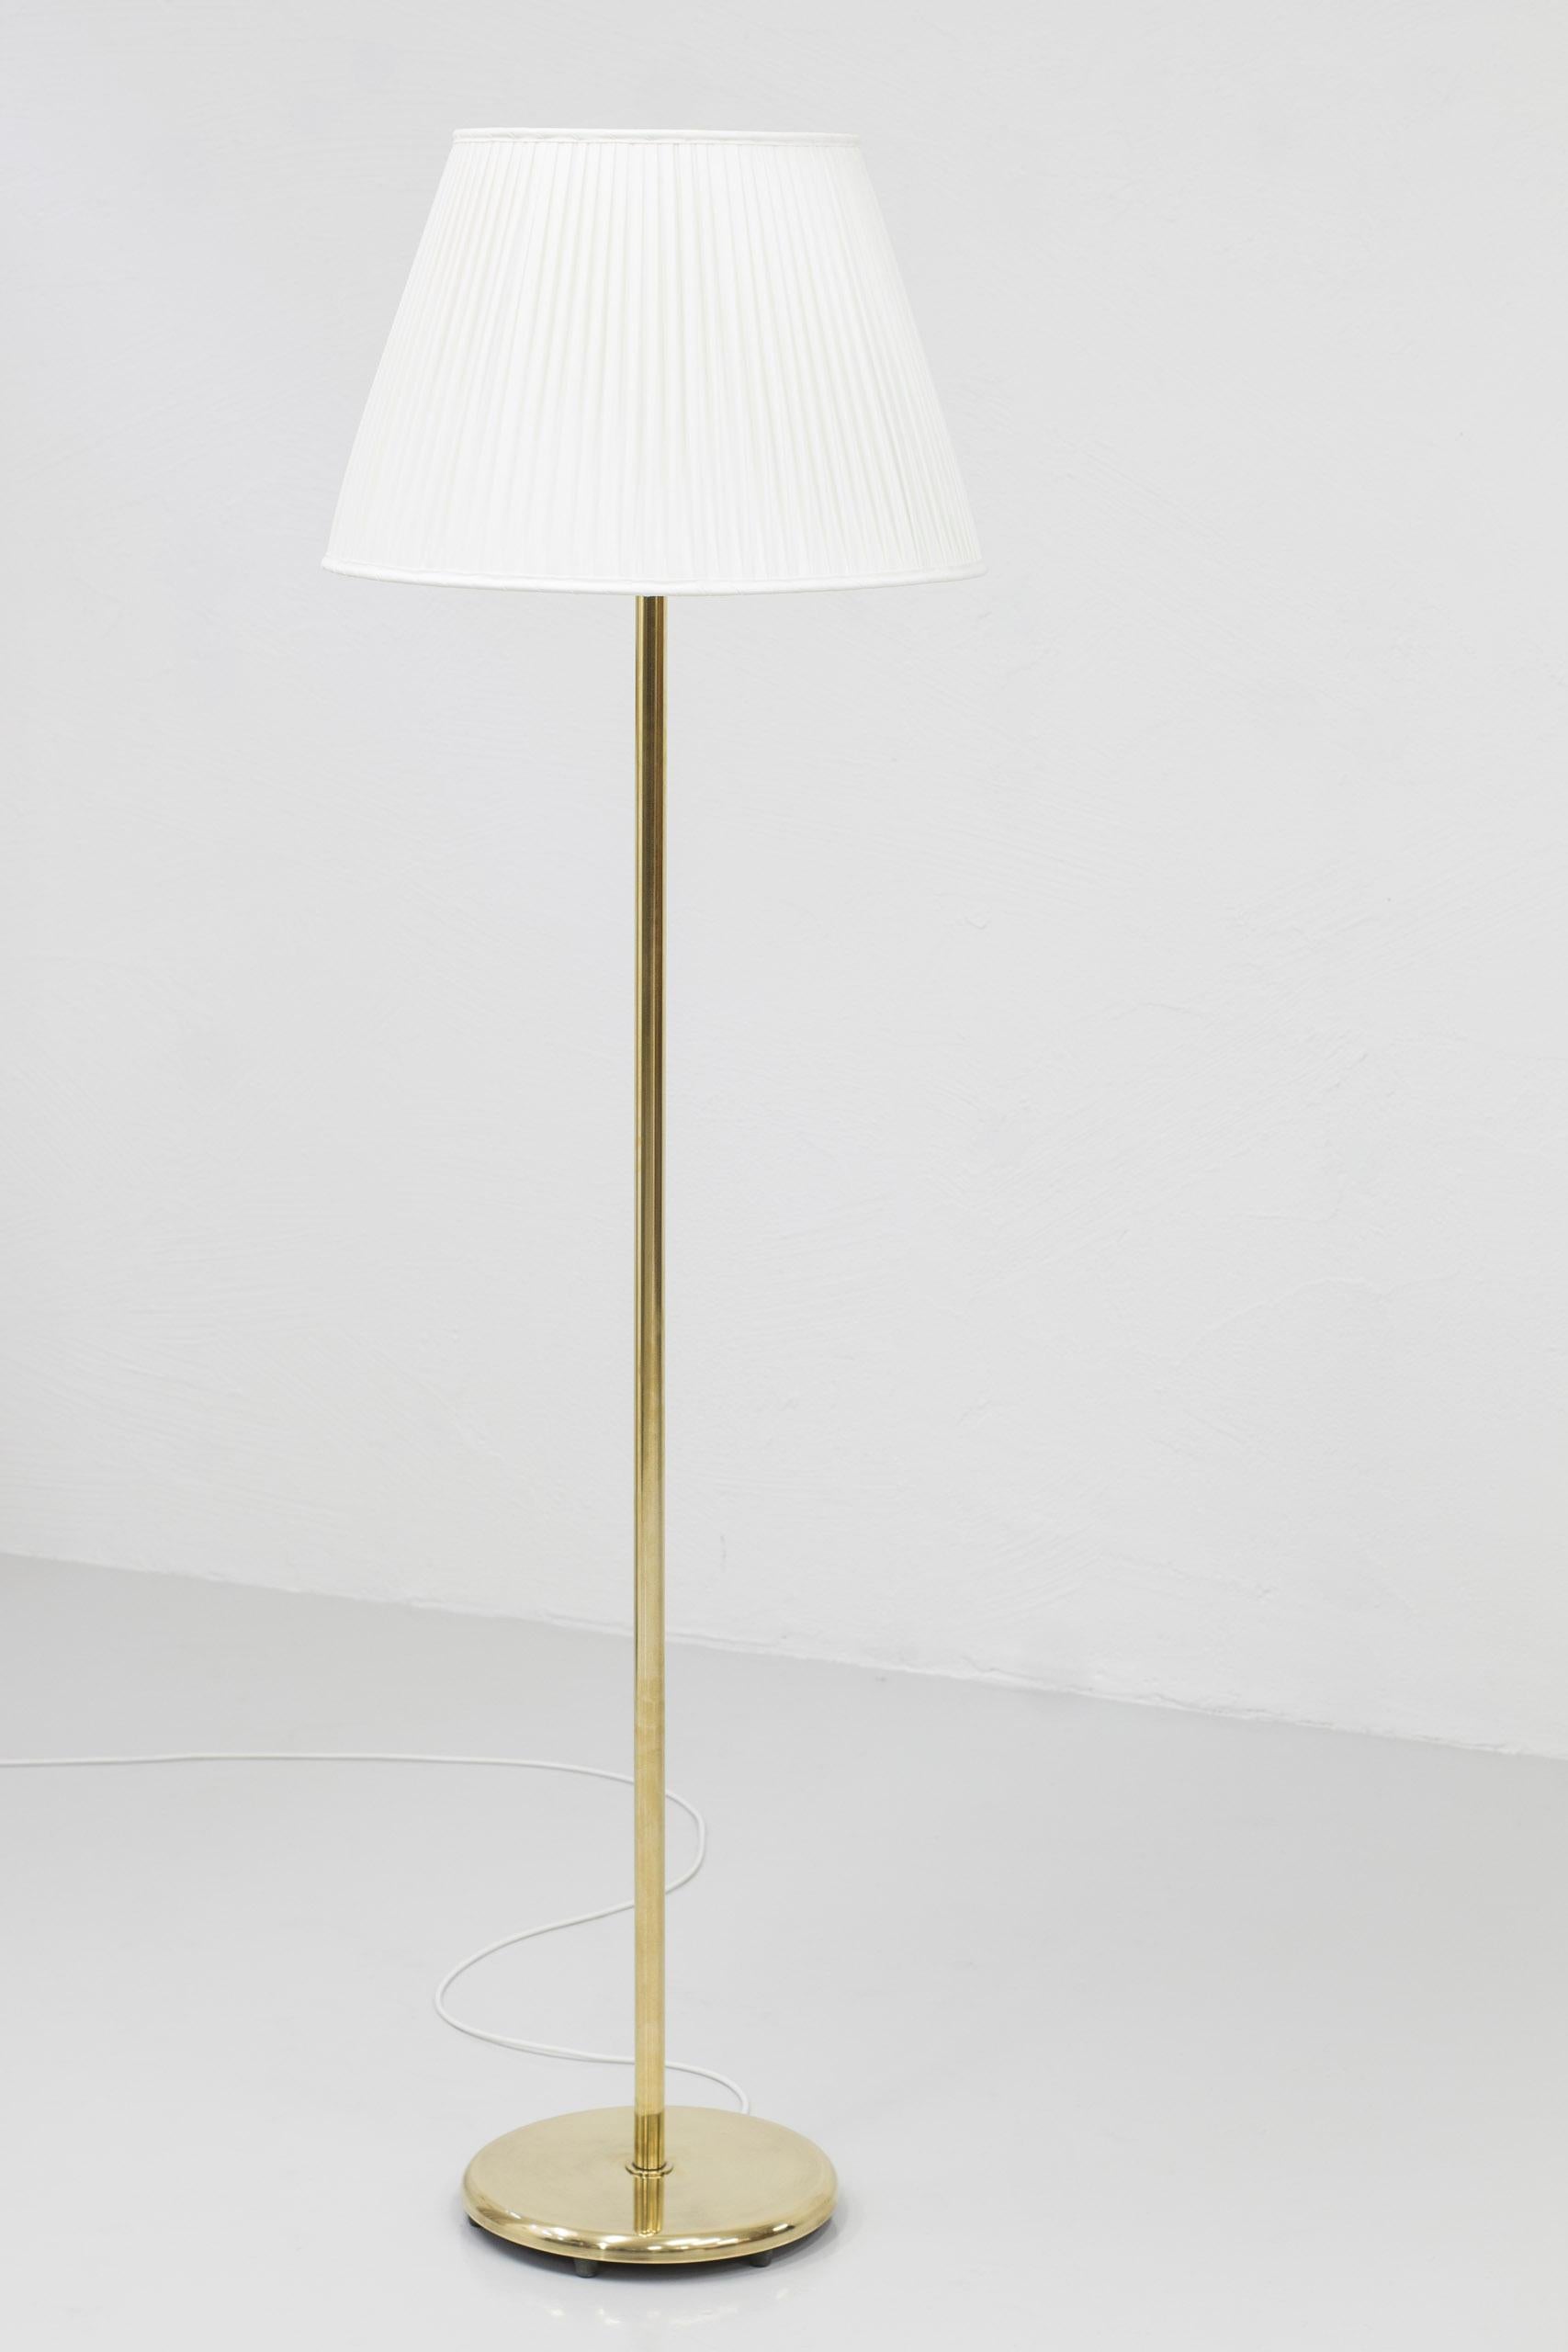 Brass and Glass Floor Lamp 15193 by Harald Notini, Böhlmarks, Sweden For Sale 7